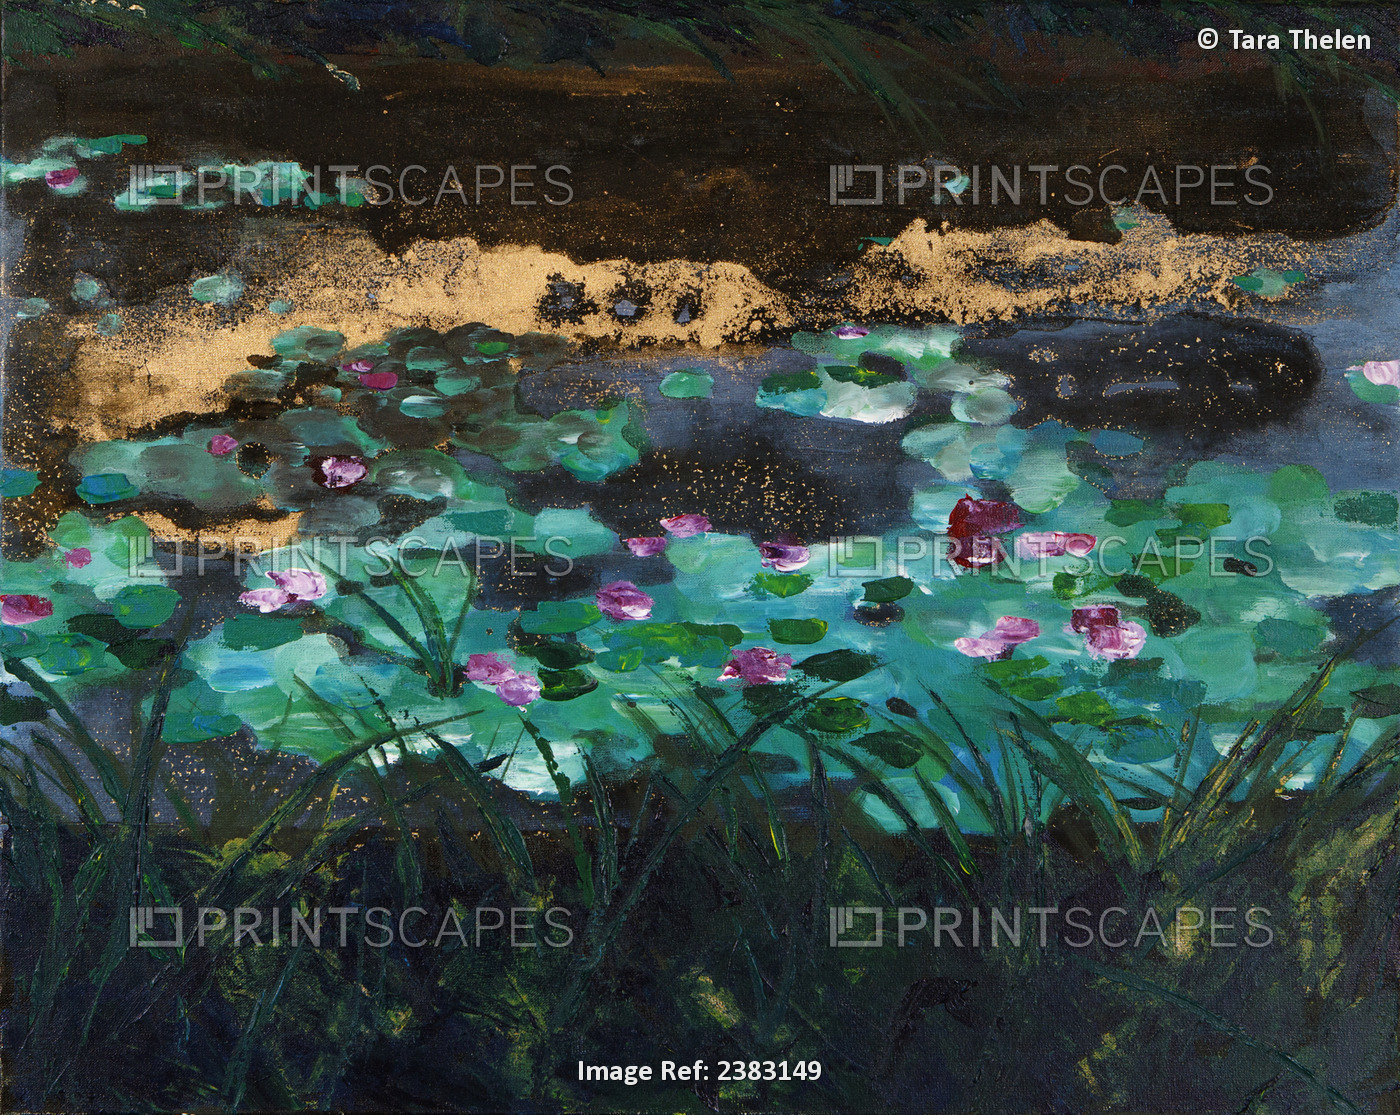 Painting Of A Pond With Lily Pads And Water Lilies